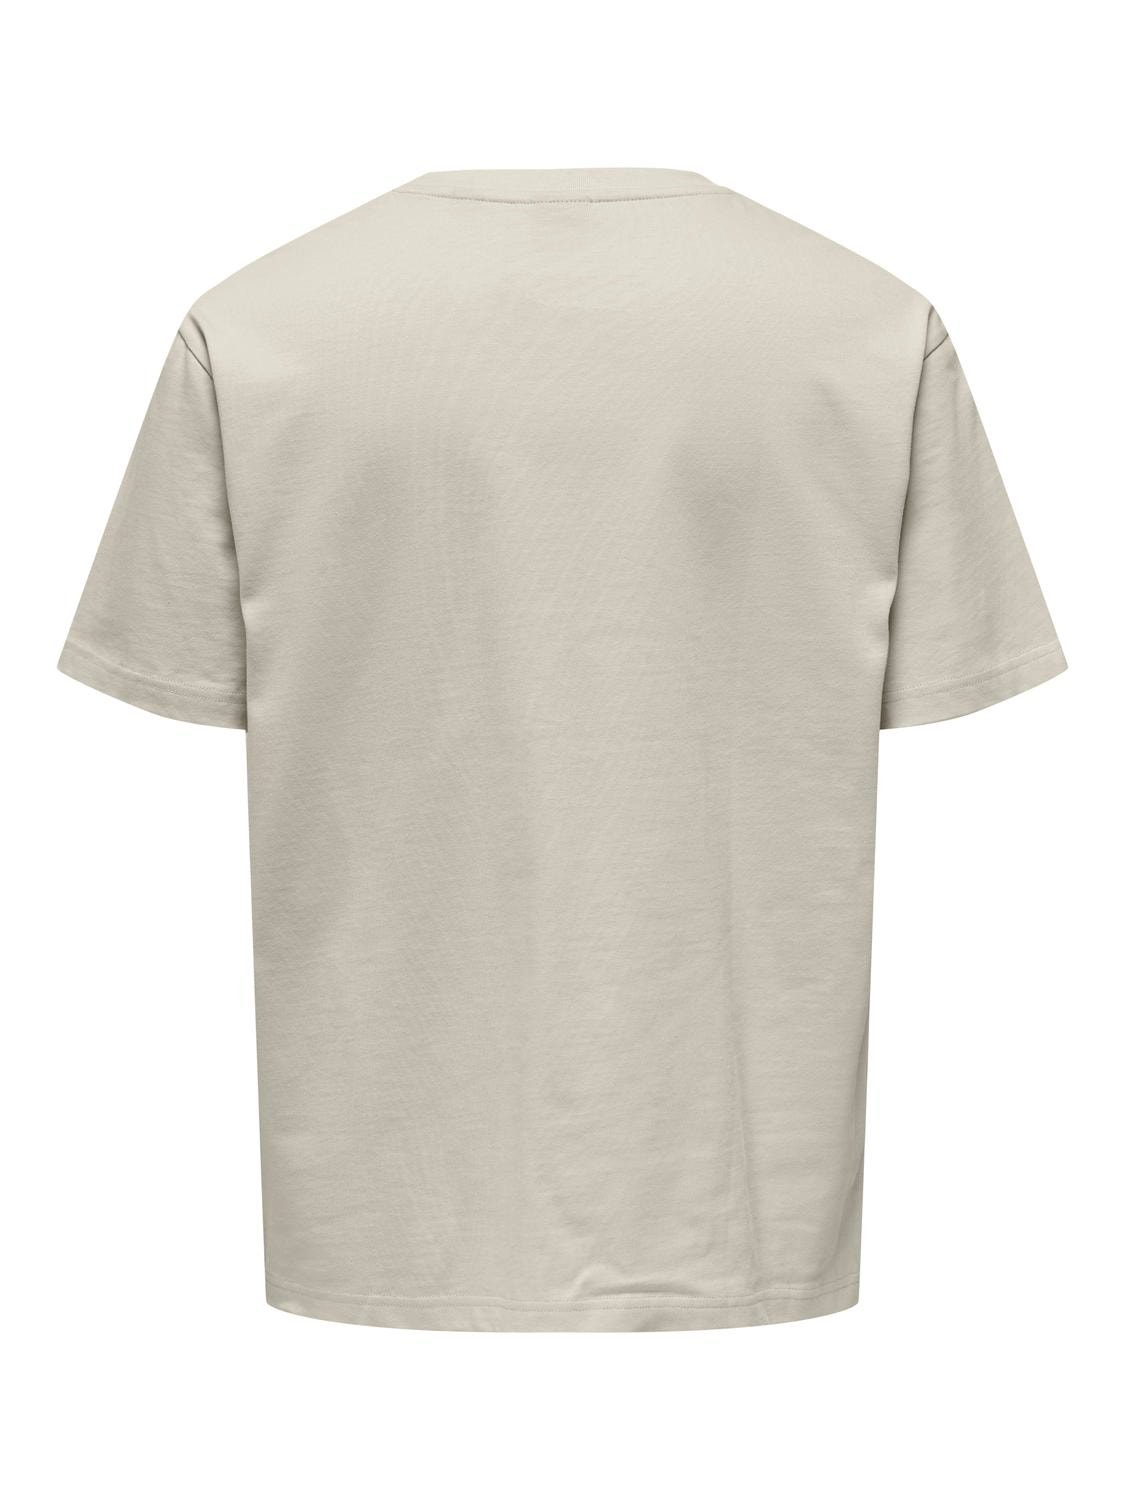 ONLY & SONS o-hals t-shirt -Silver Lining - 22028766